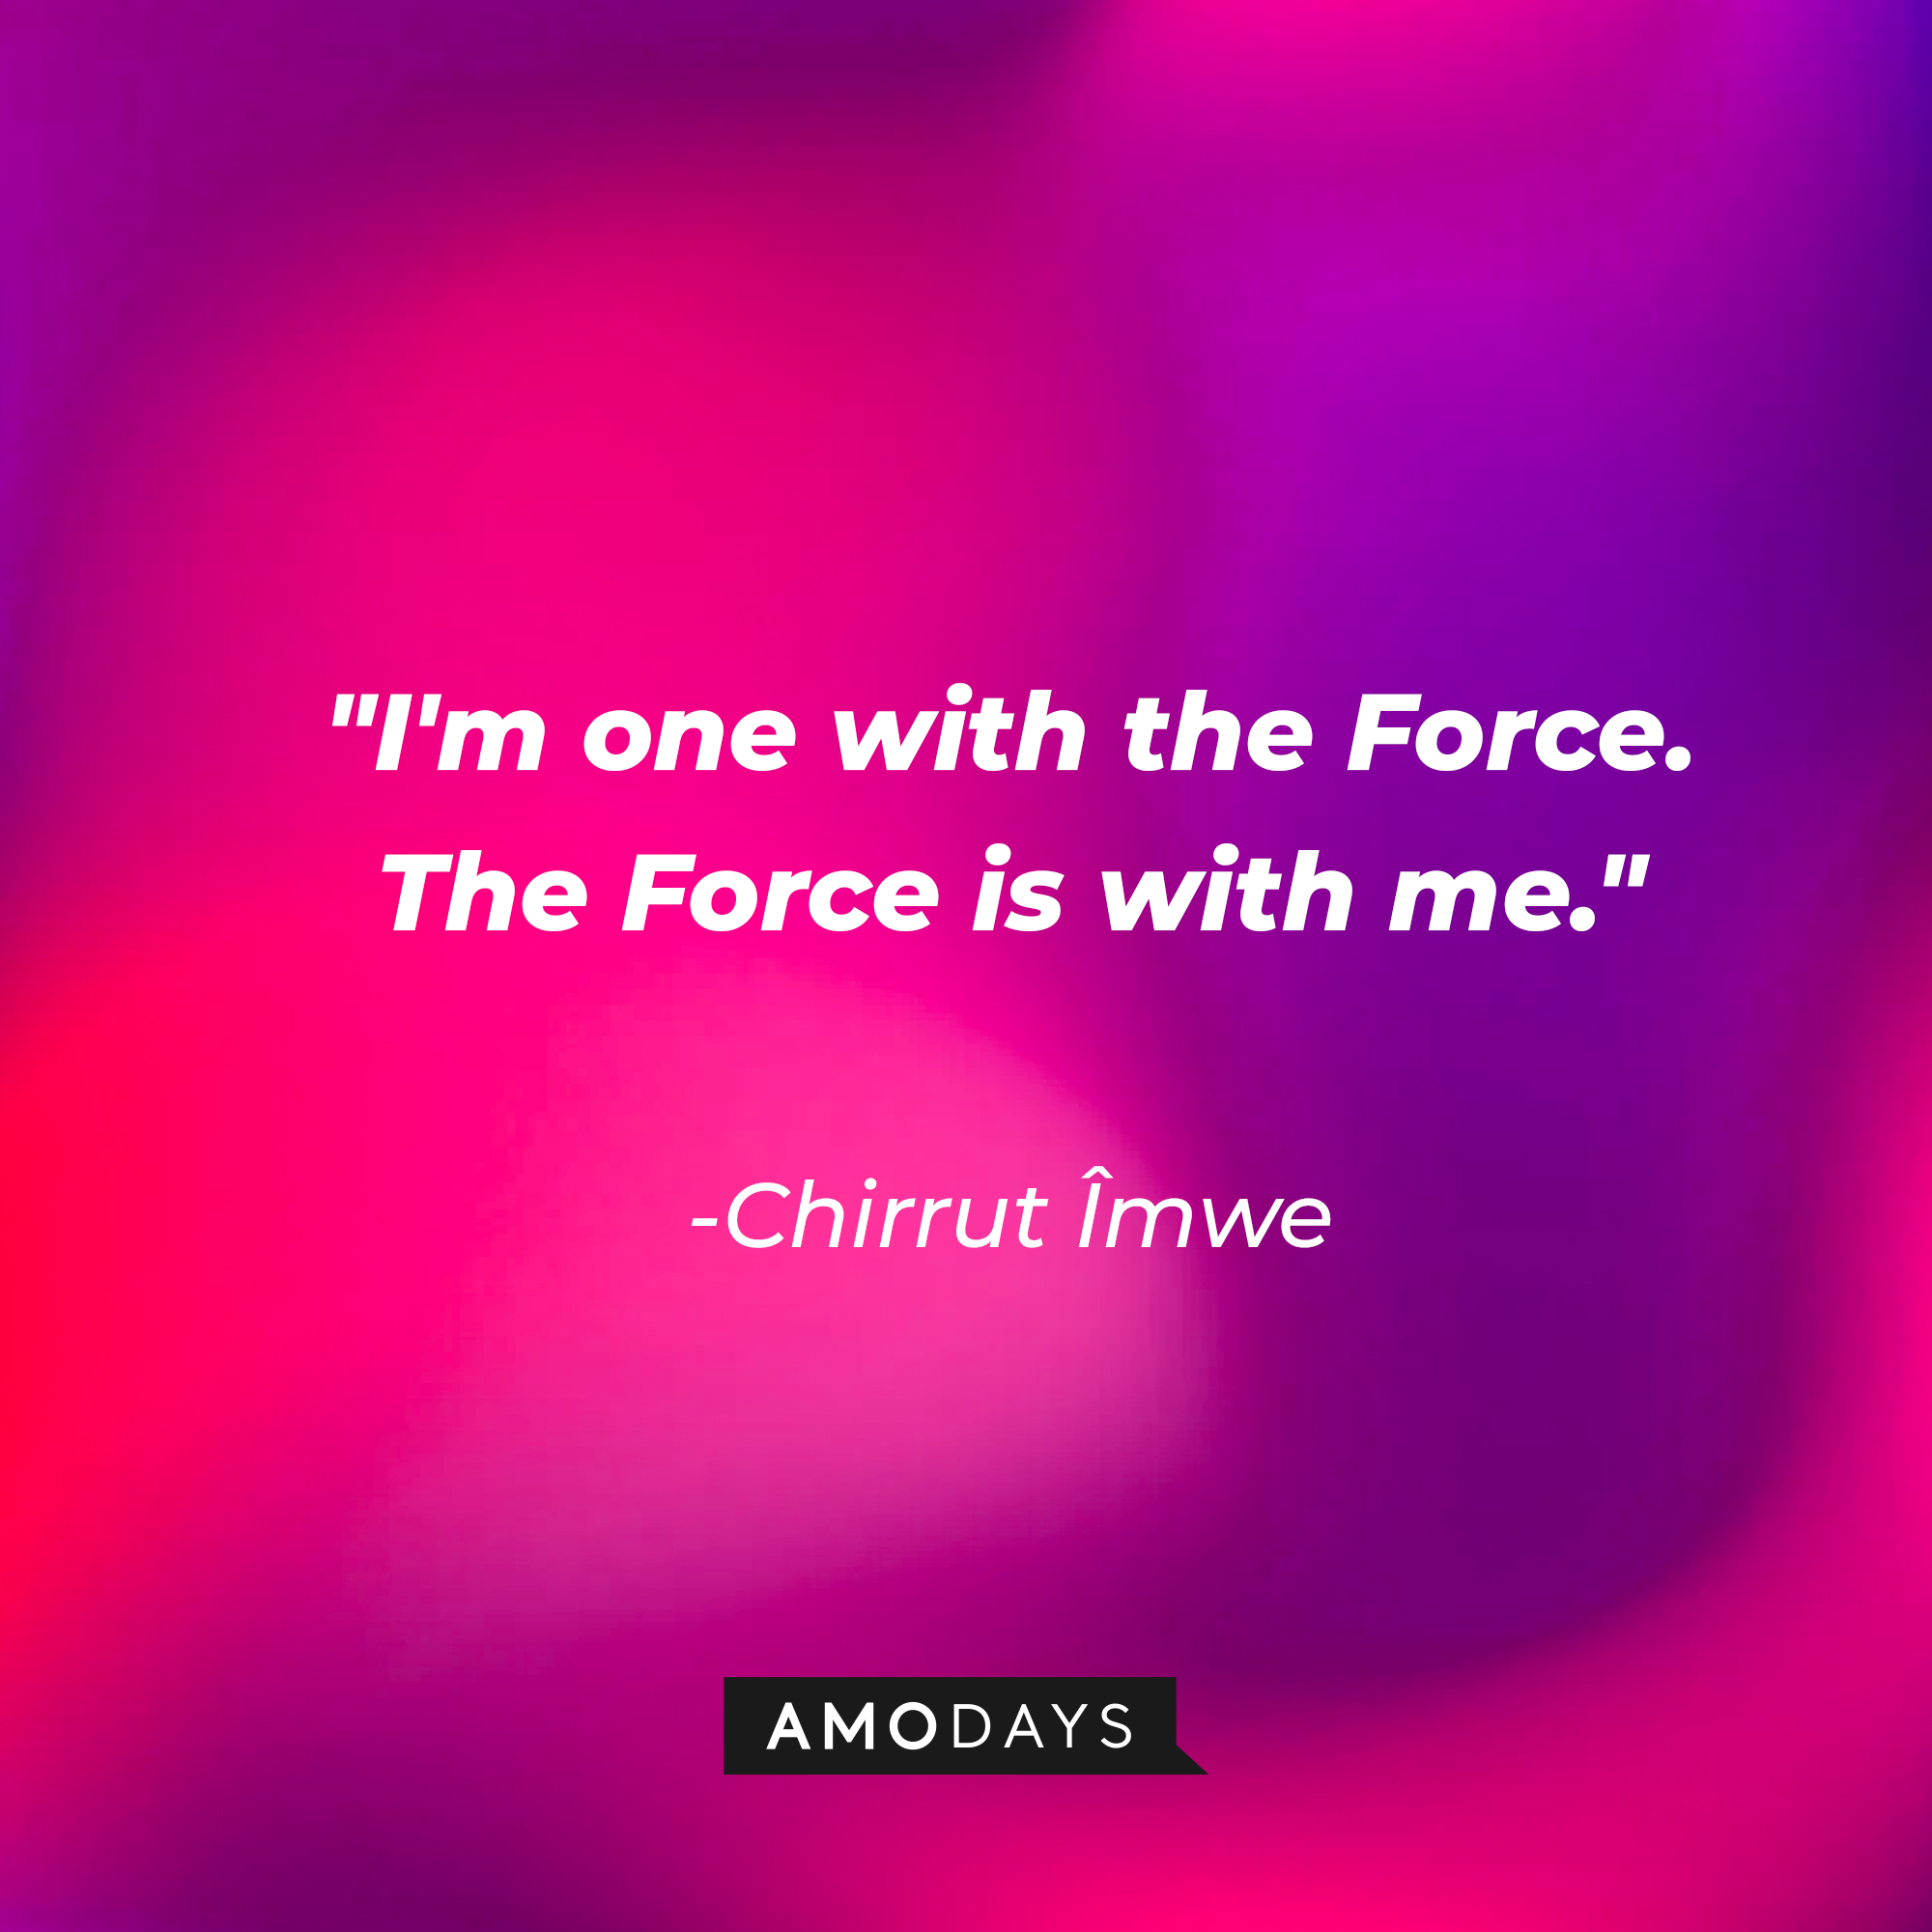 Chirrut Îmwe's quote: "I'm one with the Force. The Force is with me." | Source: Amodays